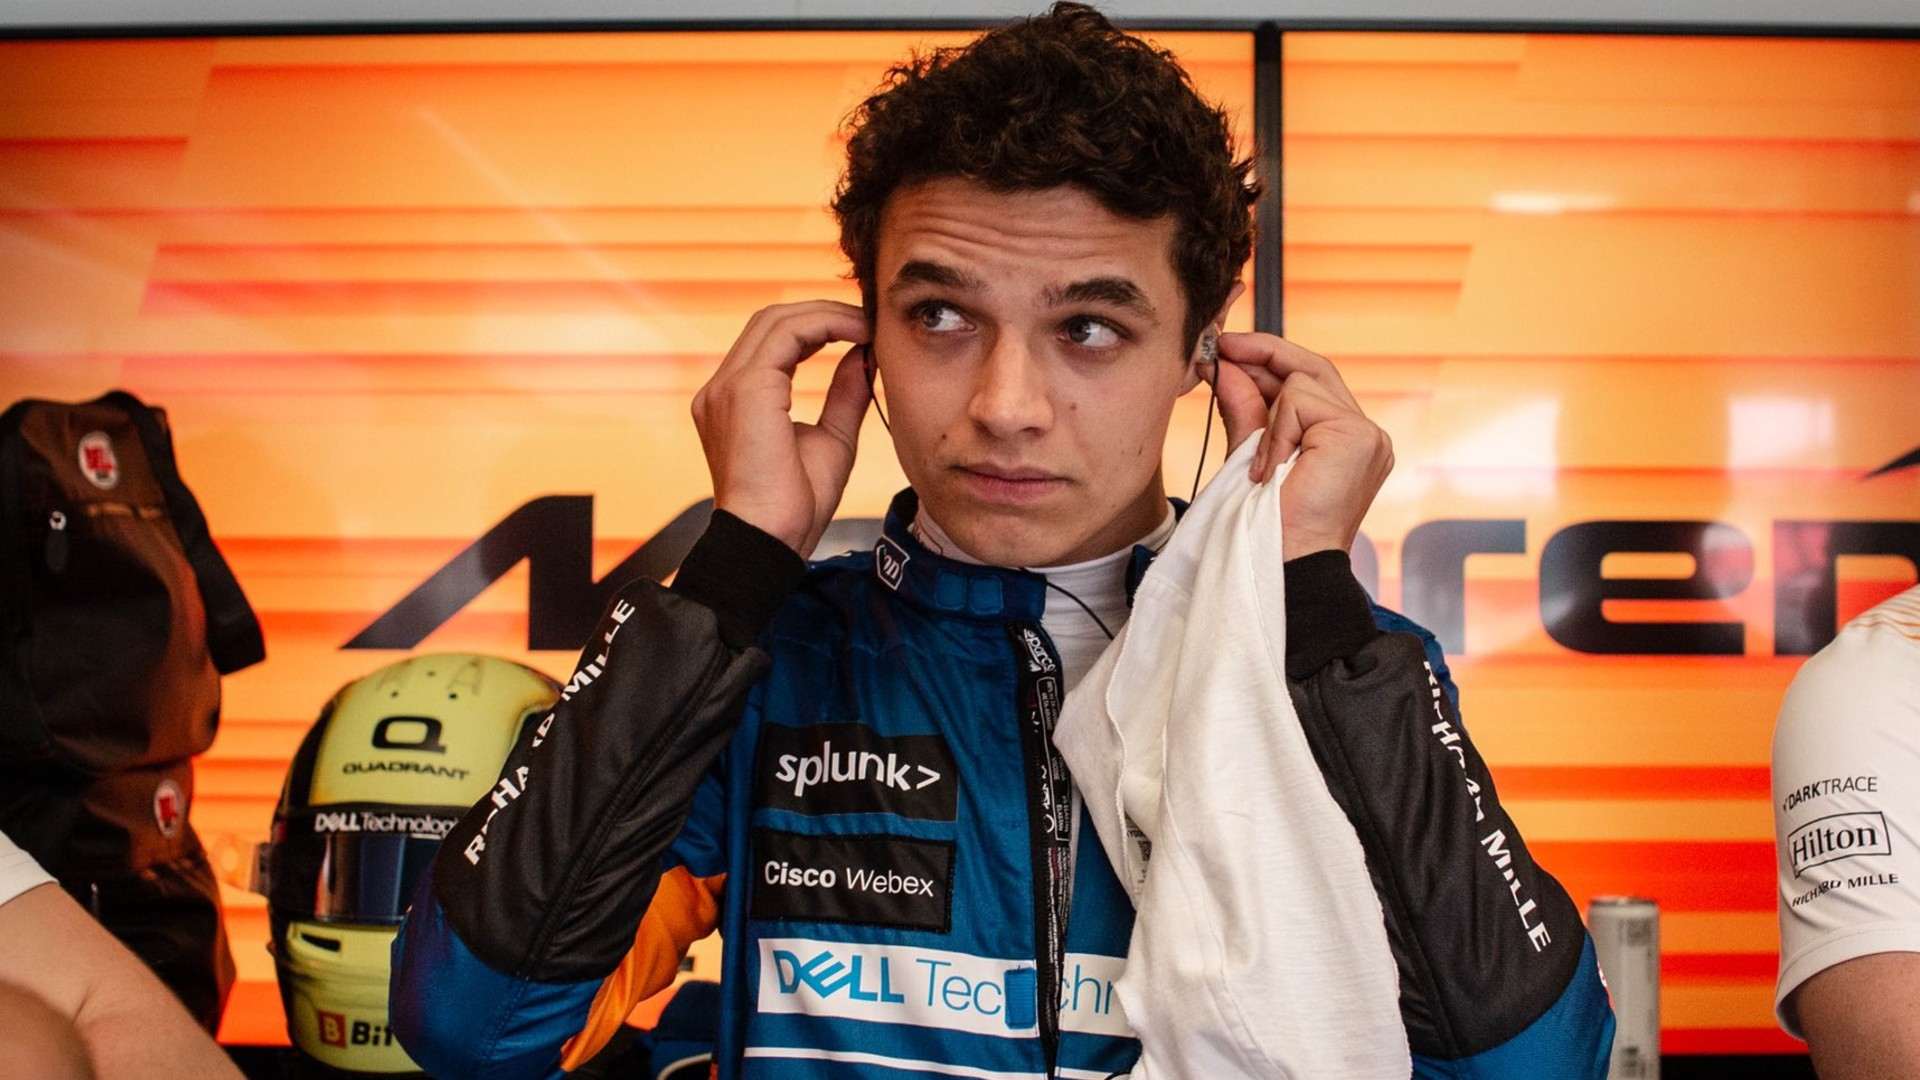 What is Lando Norris Net worth, Salary, Assets and Brand Endorsements